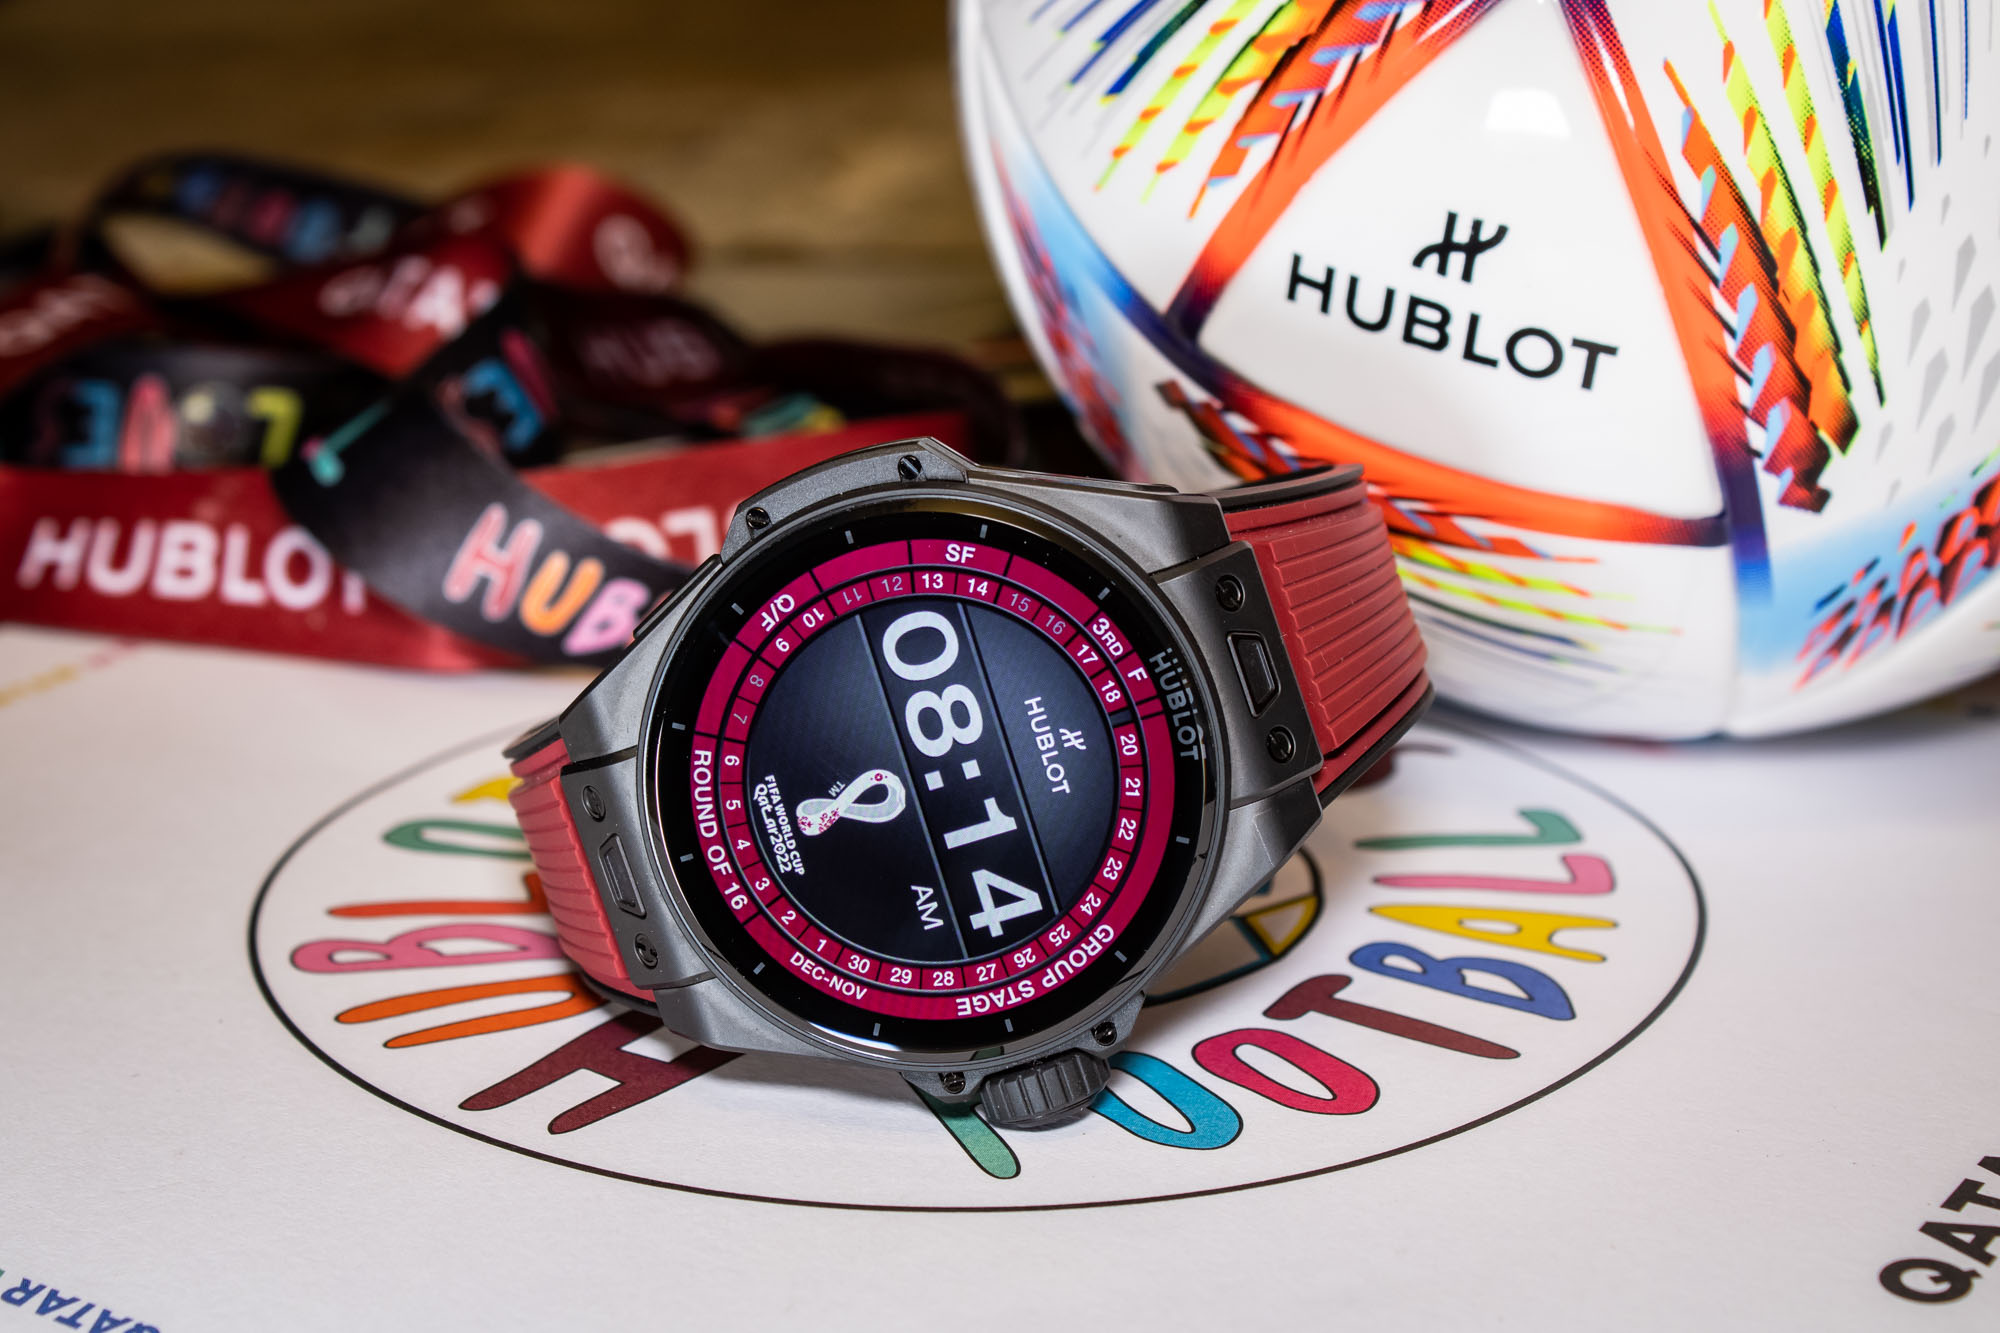 Hublot unveils 100 Qatar limited edition smart watches ahead of